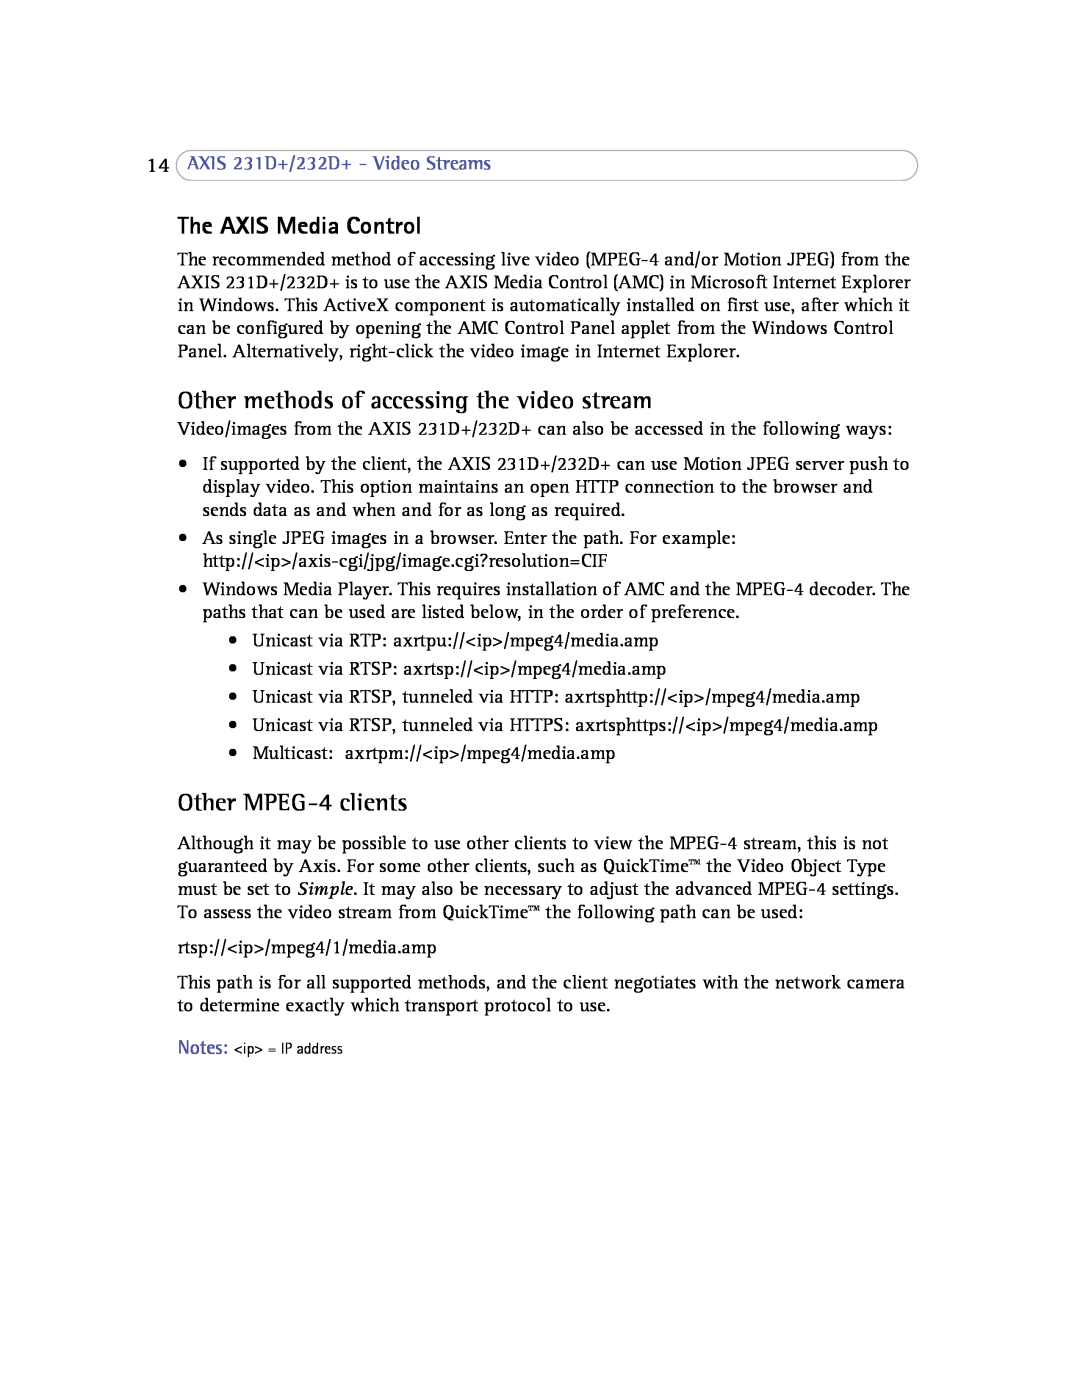 Axis Communications 232d+ The AXIS Media Control, Other methods of accessing the video stream, Other MPEG-4 clients 